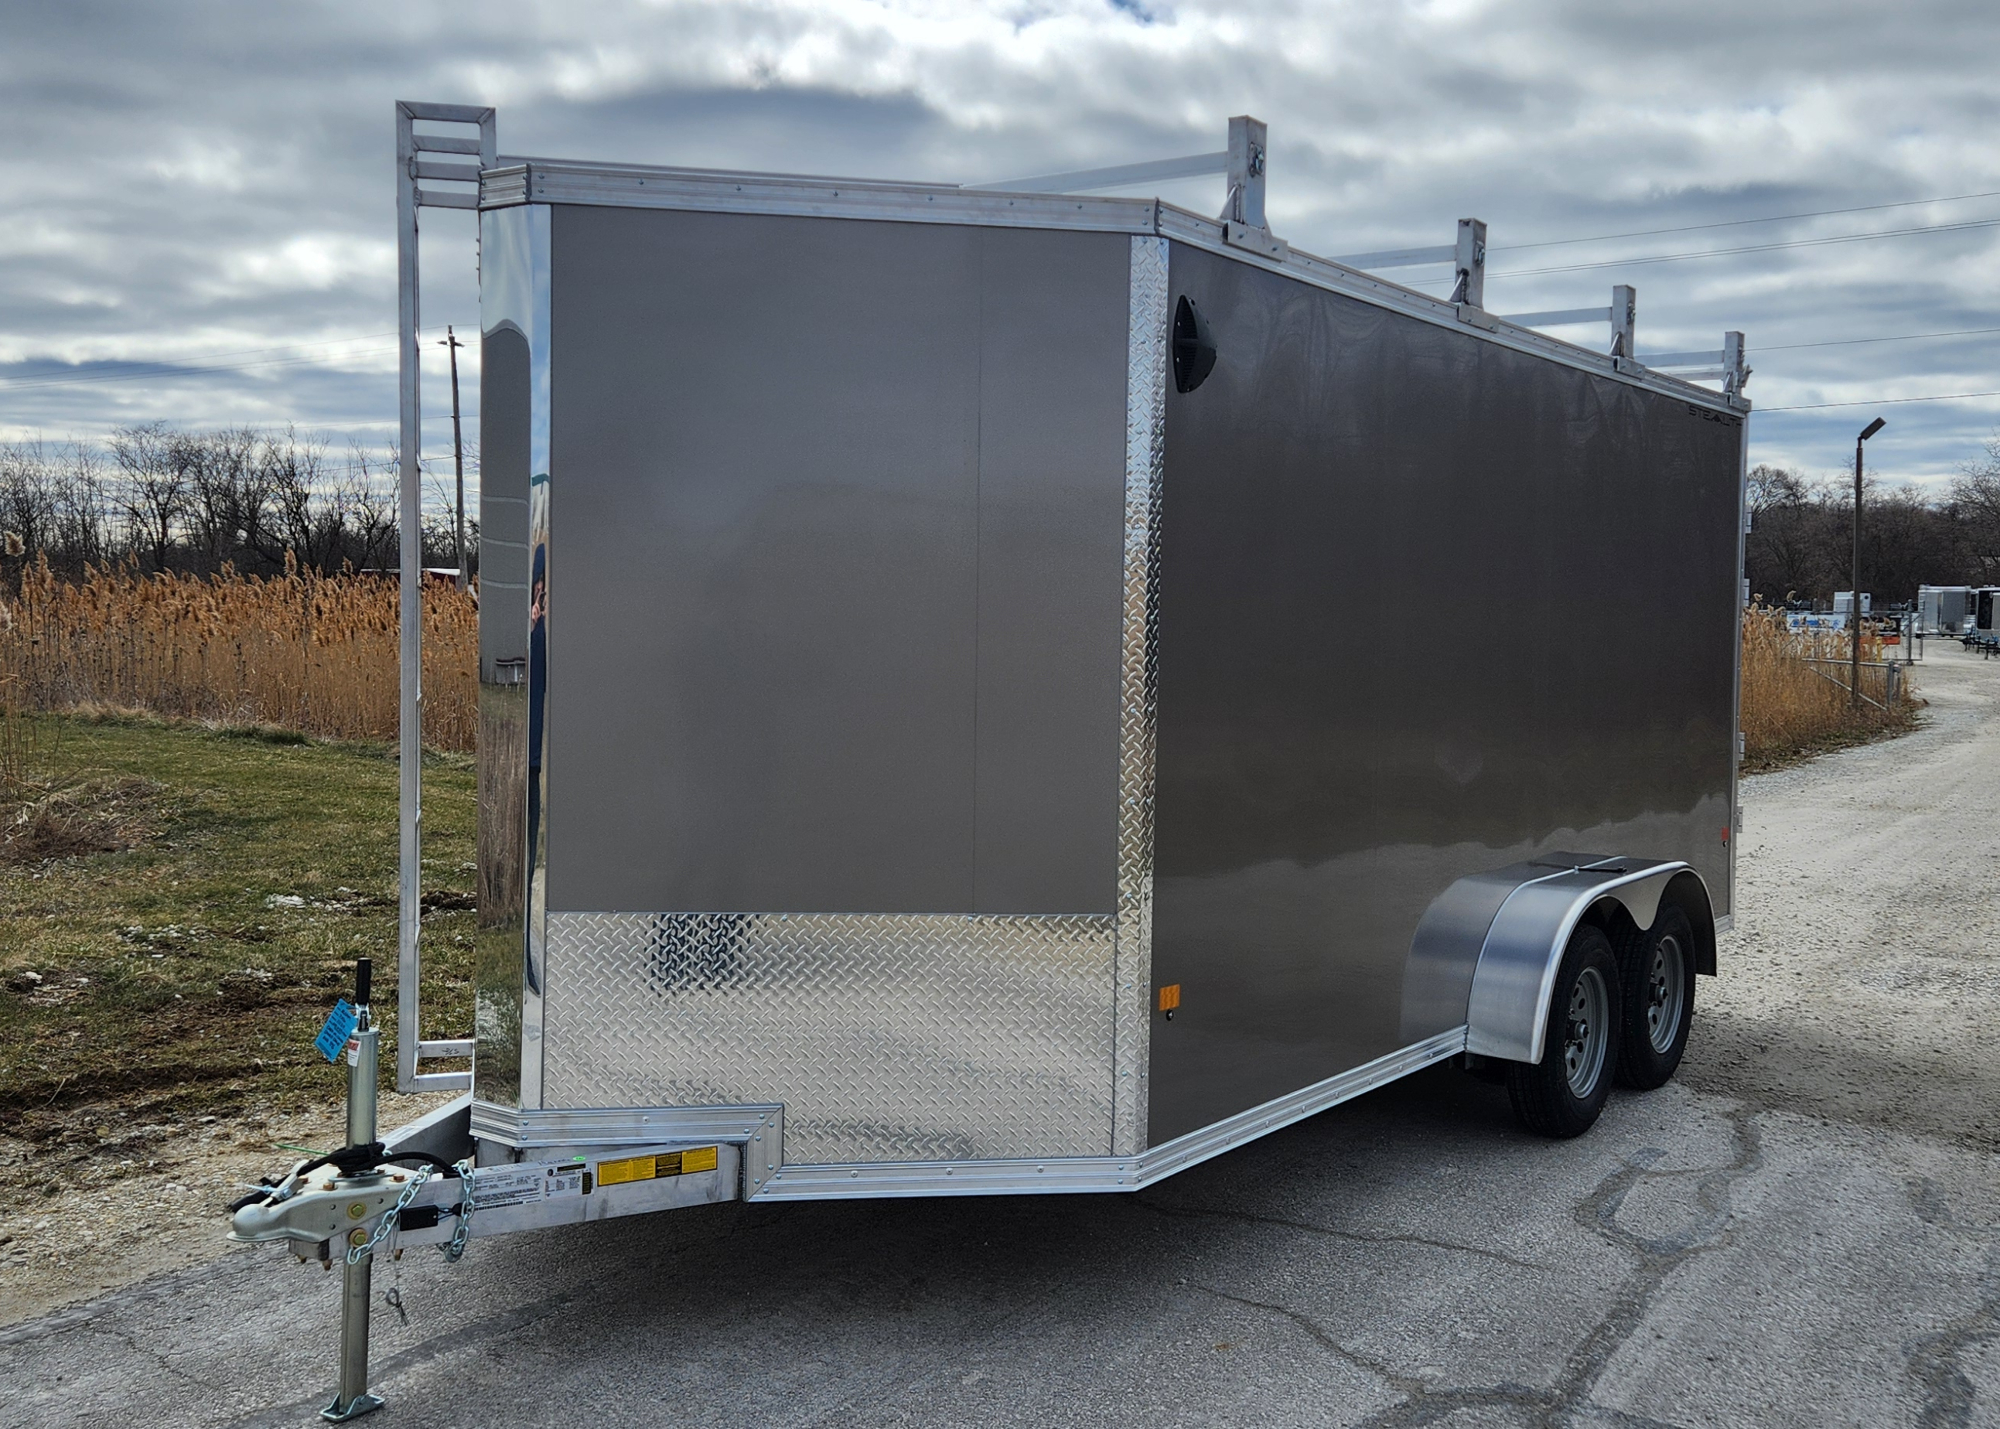 CargoPro Stealth 7 X 16 Aluminum Frame Tandem Axle Contractor Cargo Trailer Double Rear Doors, 79 inch Interior Height- Pewter